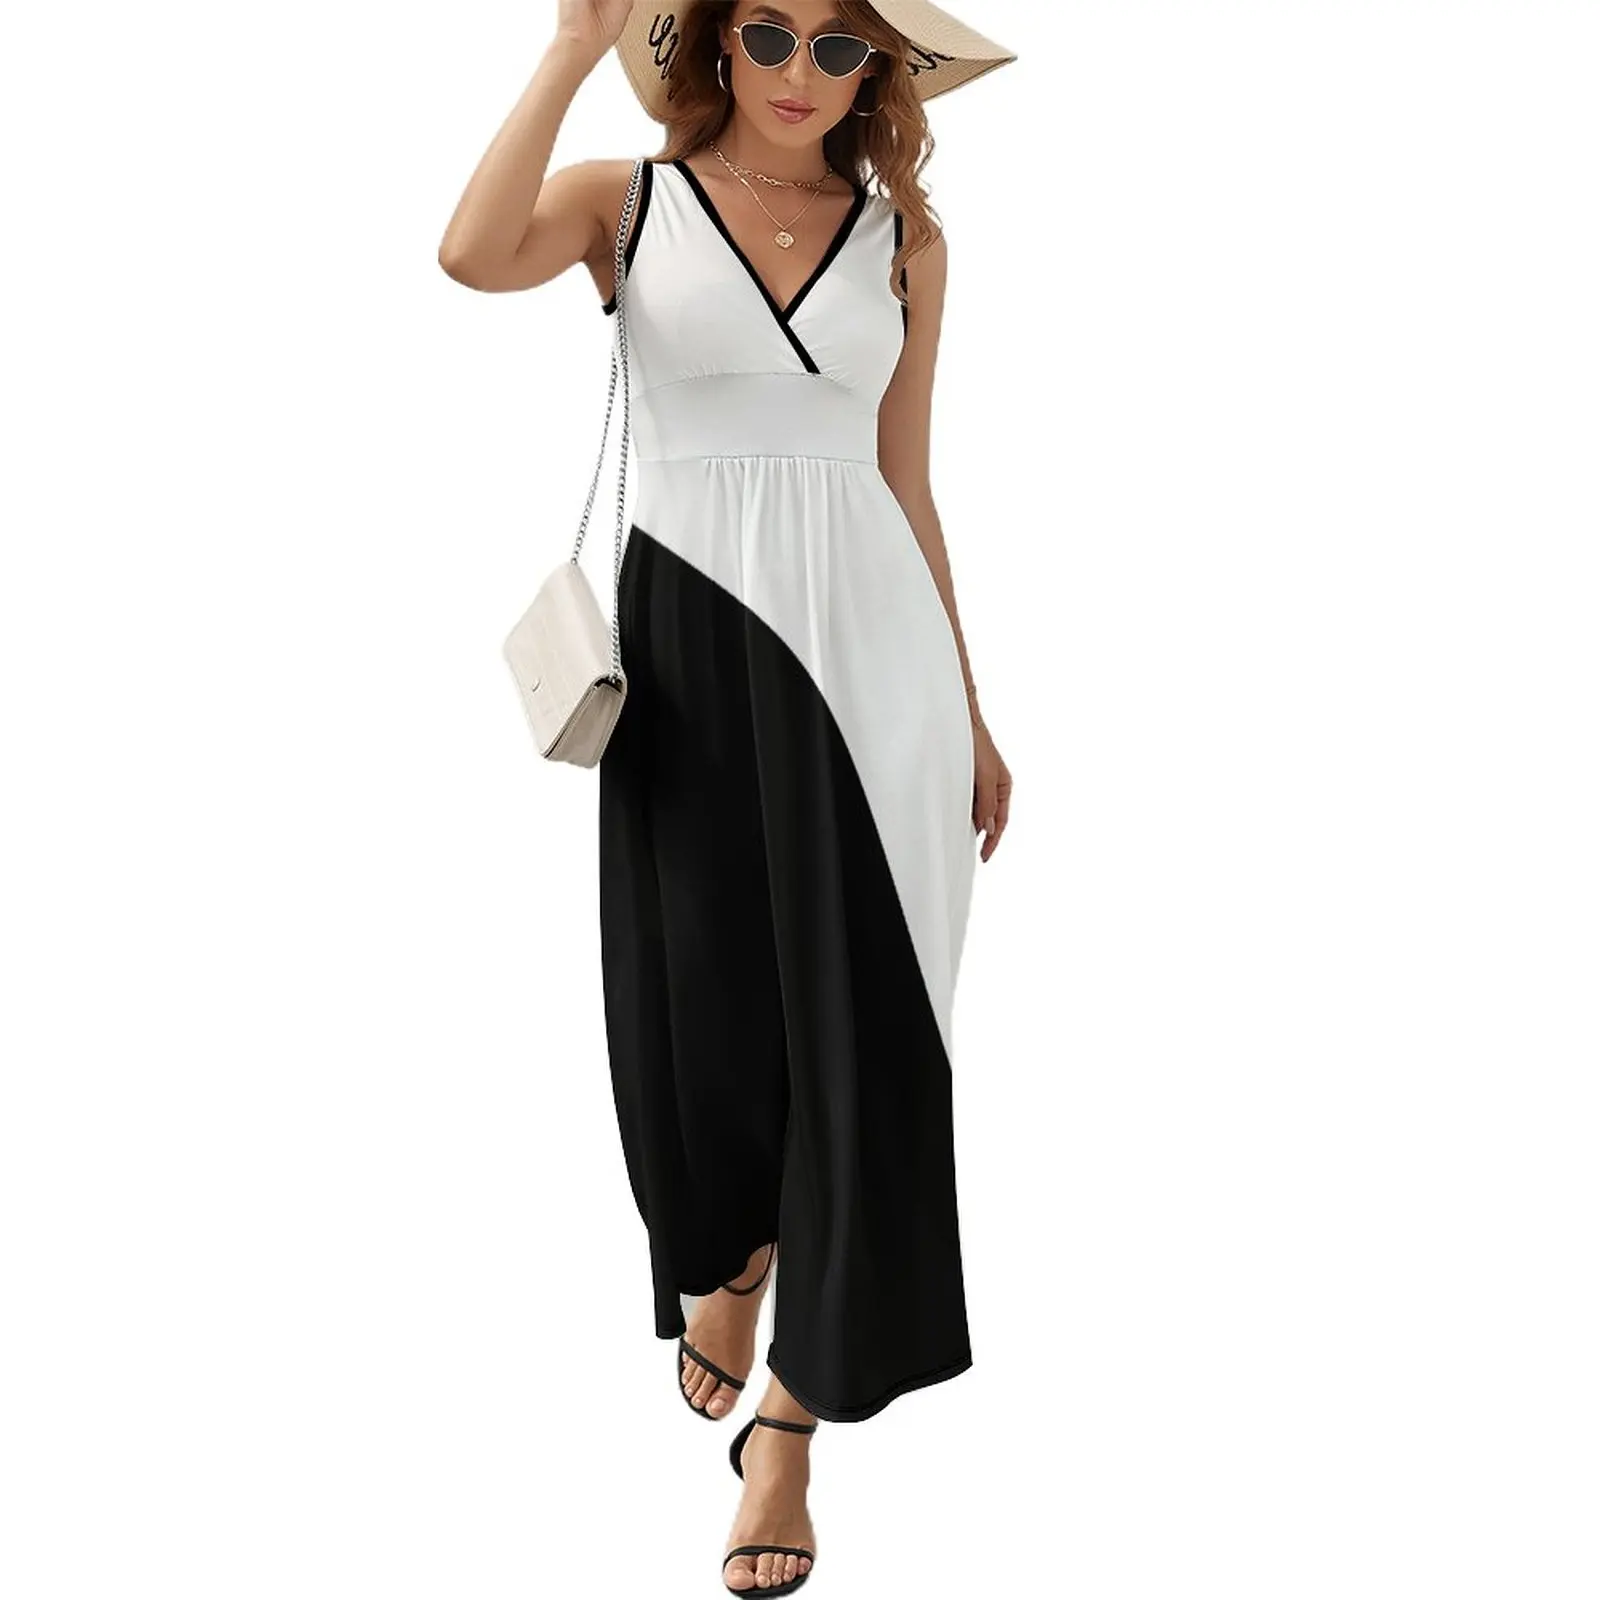 

Black and White Two Tone Color Block Sleeveless Dress dresses for official occasions beach dresses